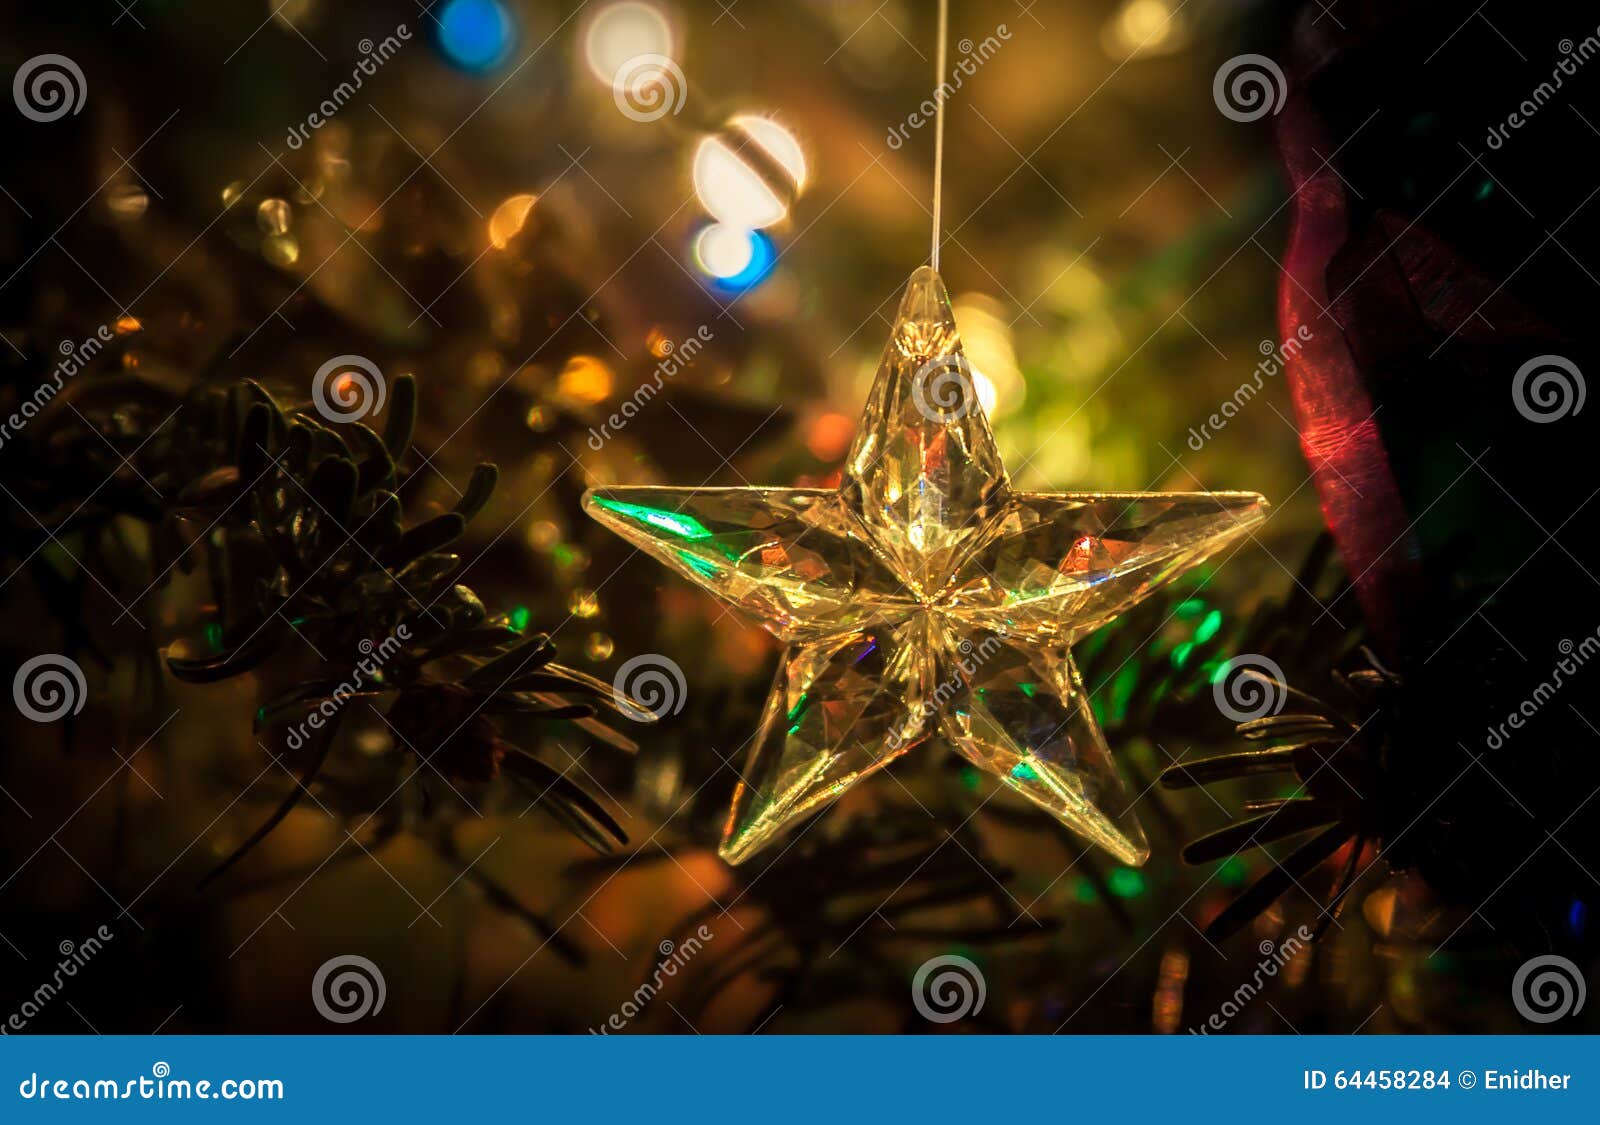 Star of Glass with Abstract Background of Holiday Lights Stock Photo ...